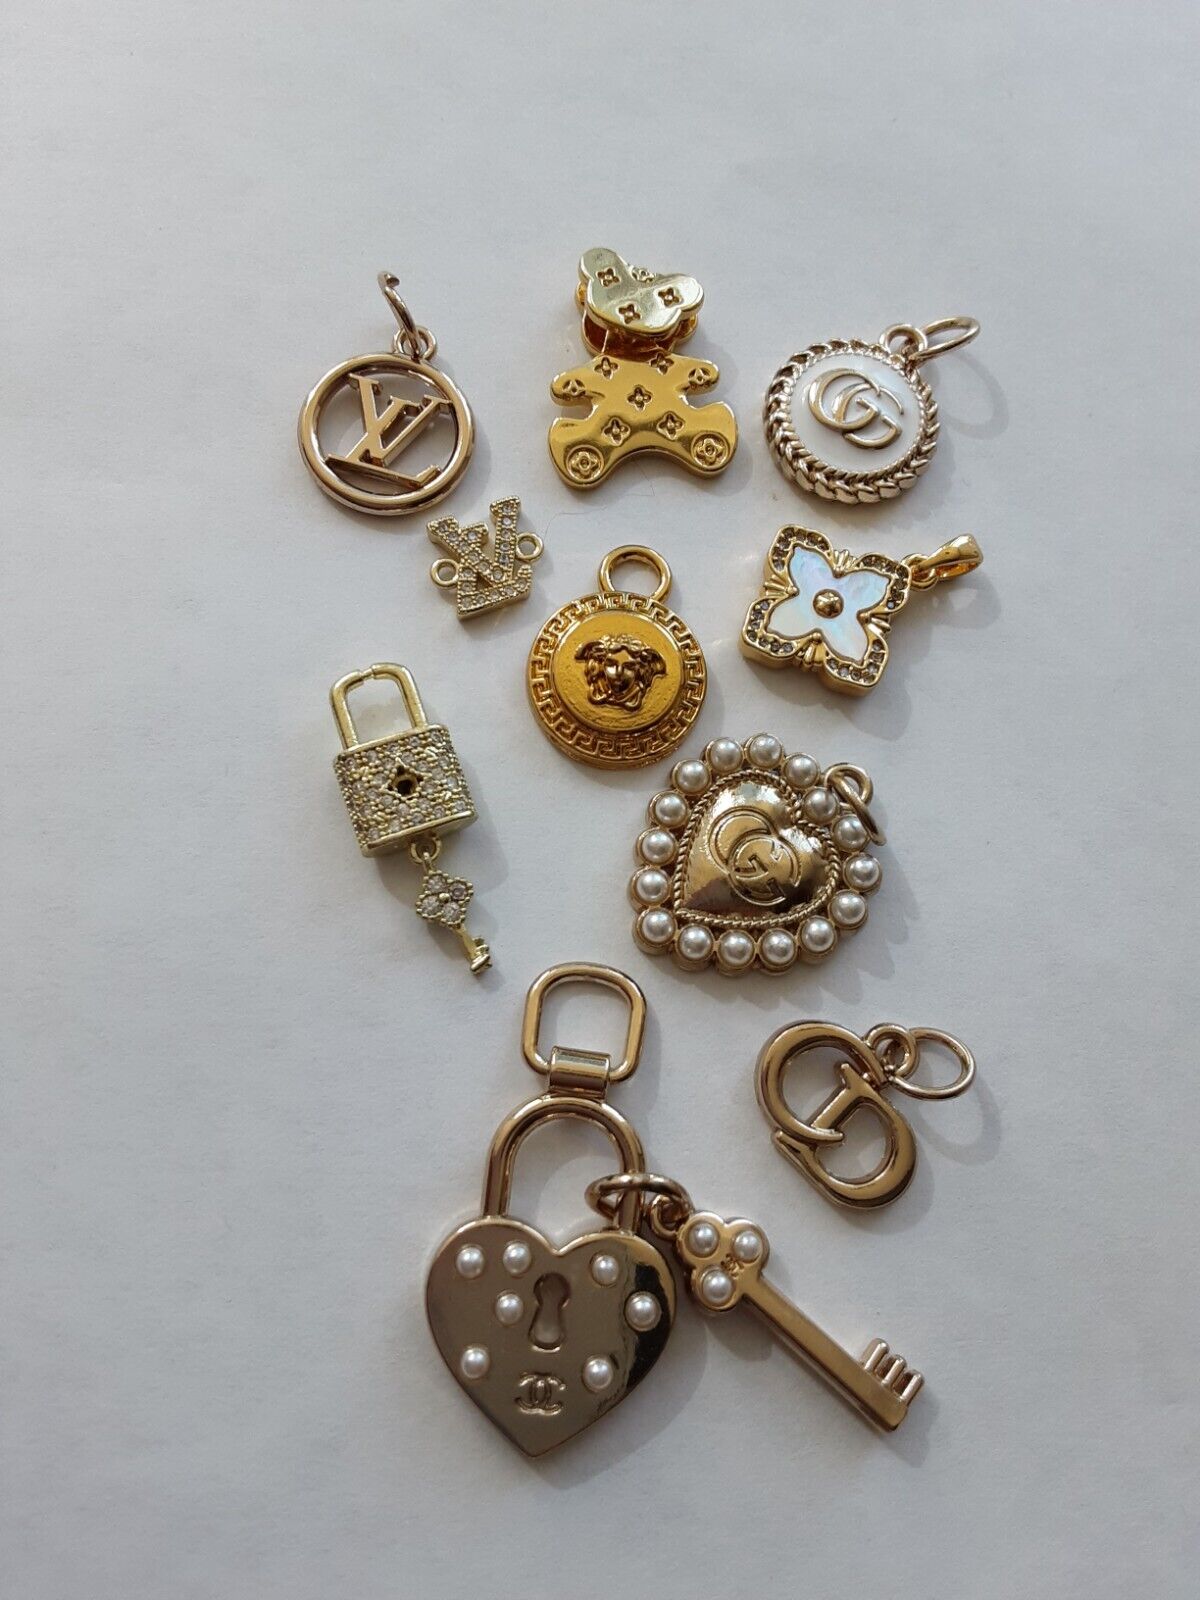 Gucci  Versace Dior Zipper Pull Button  lot of 10  mix charms